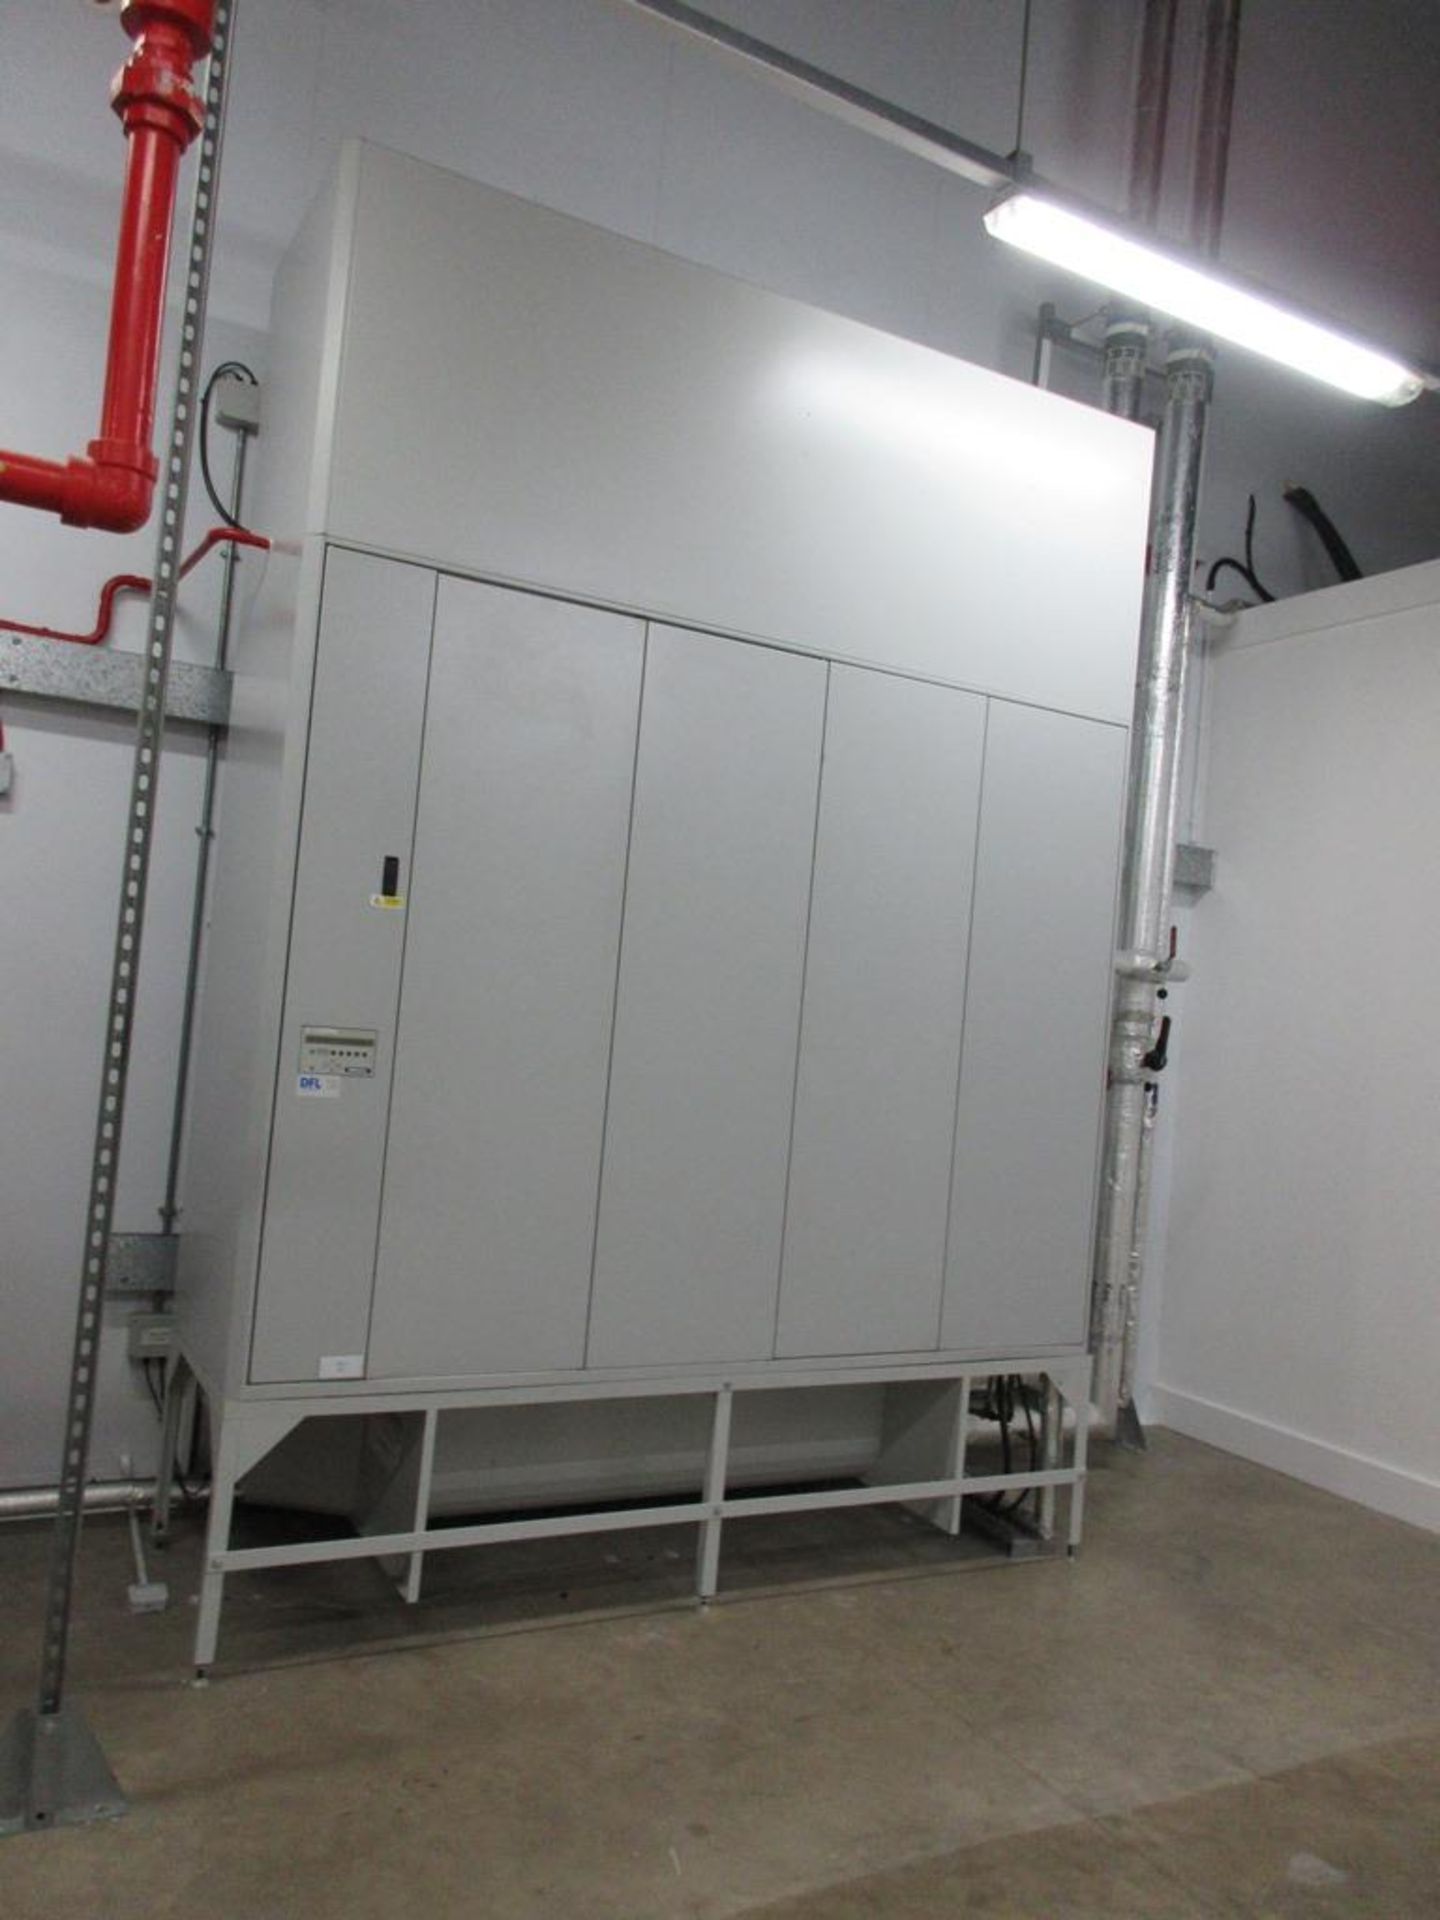 The computer room air conditioning [CRAC] air handling system throughout including - Image 19 of 30